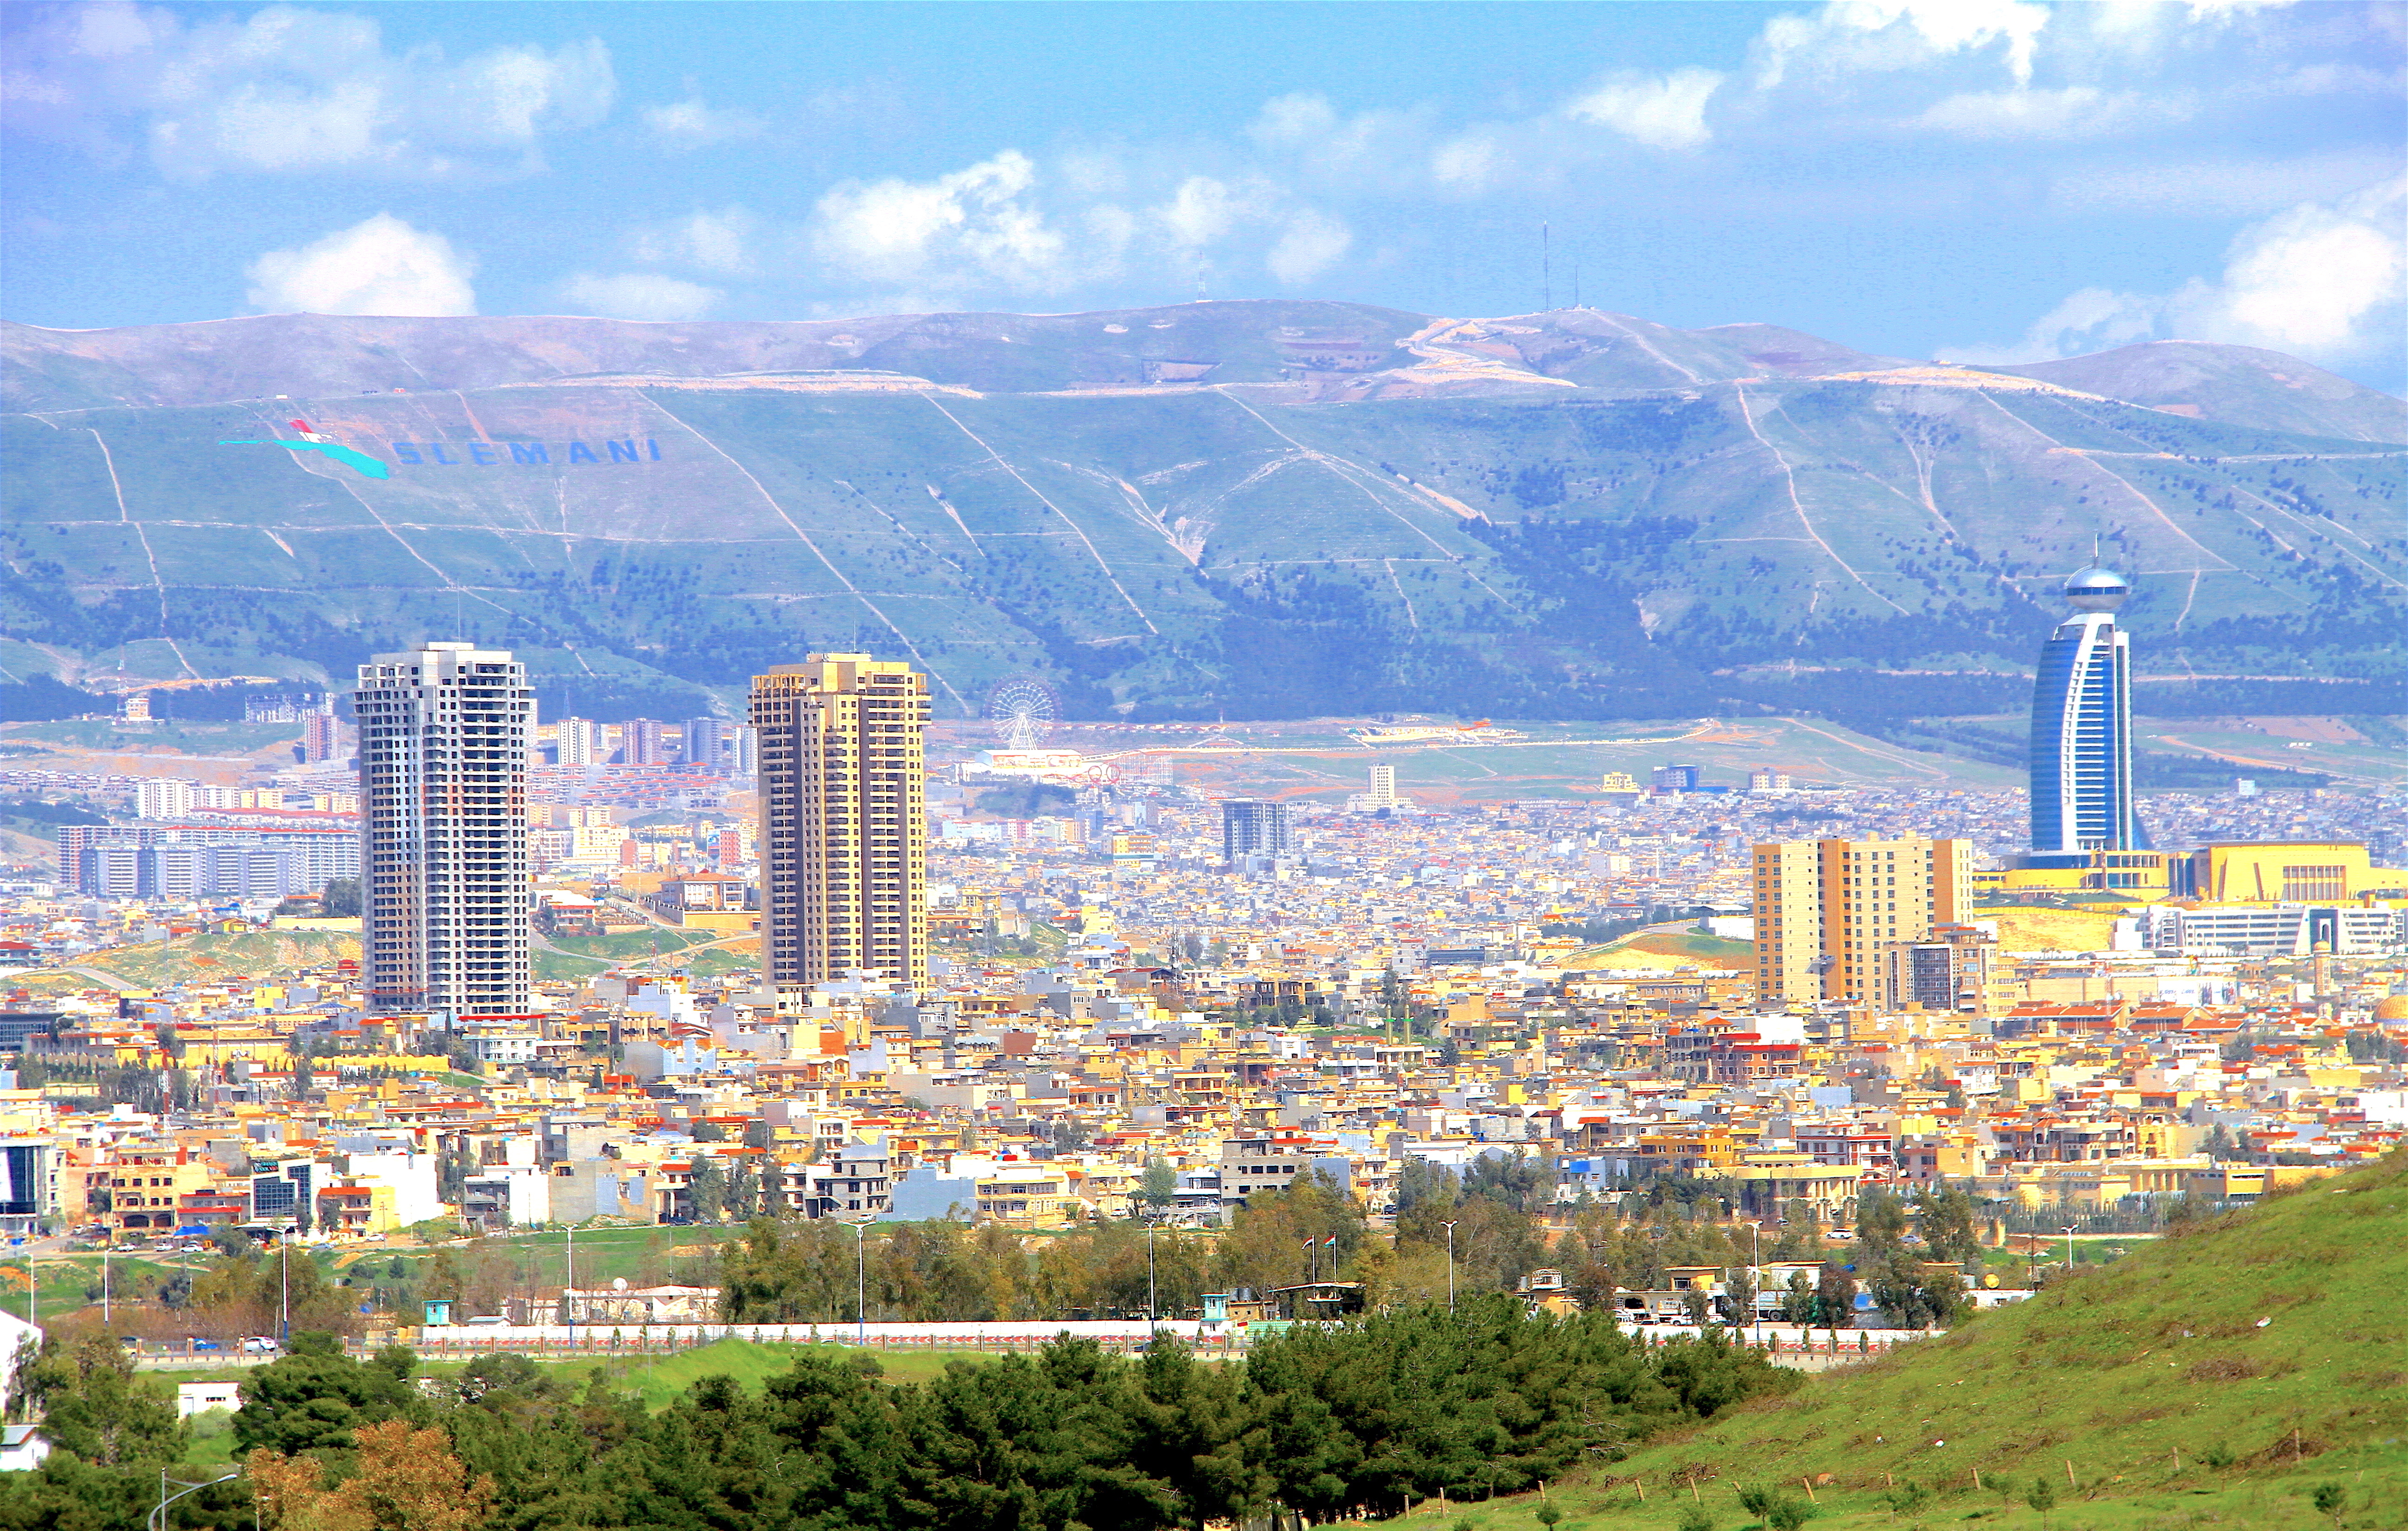 View_of_Sulaimani_-_Slemani_-_City_in_Southern_Kurdistan_in_Spring_2016.JPG